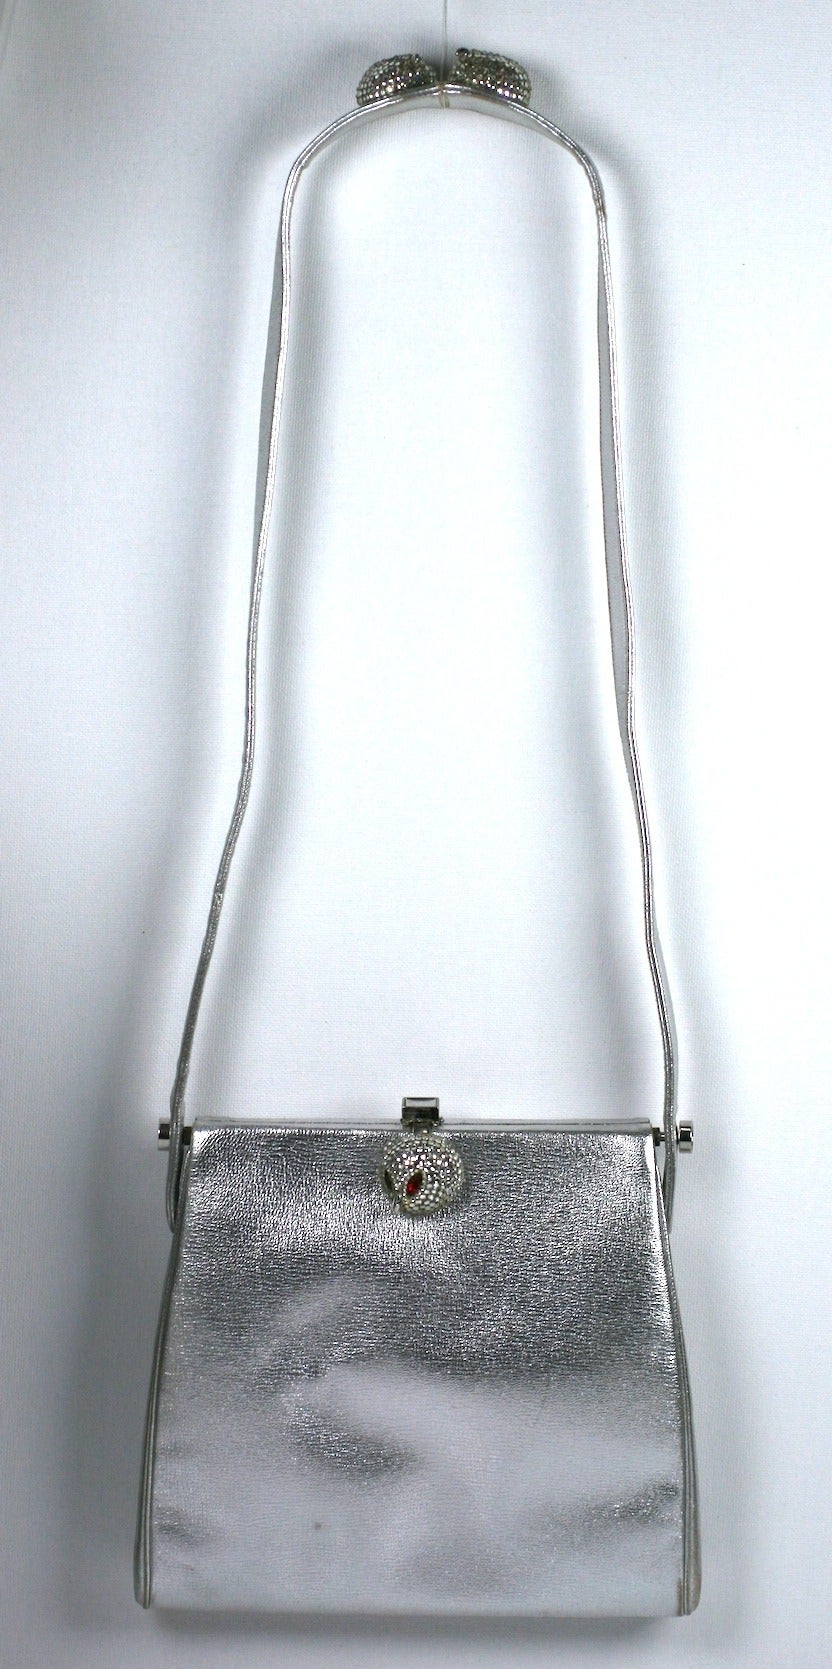 Early and unusual Judith Leiber Pave Shoulder Bag in silver kid leather with applied 3-D bombe, pave owl heads. Unusual design with charming figural accents.  1960's USA. 7